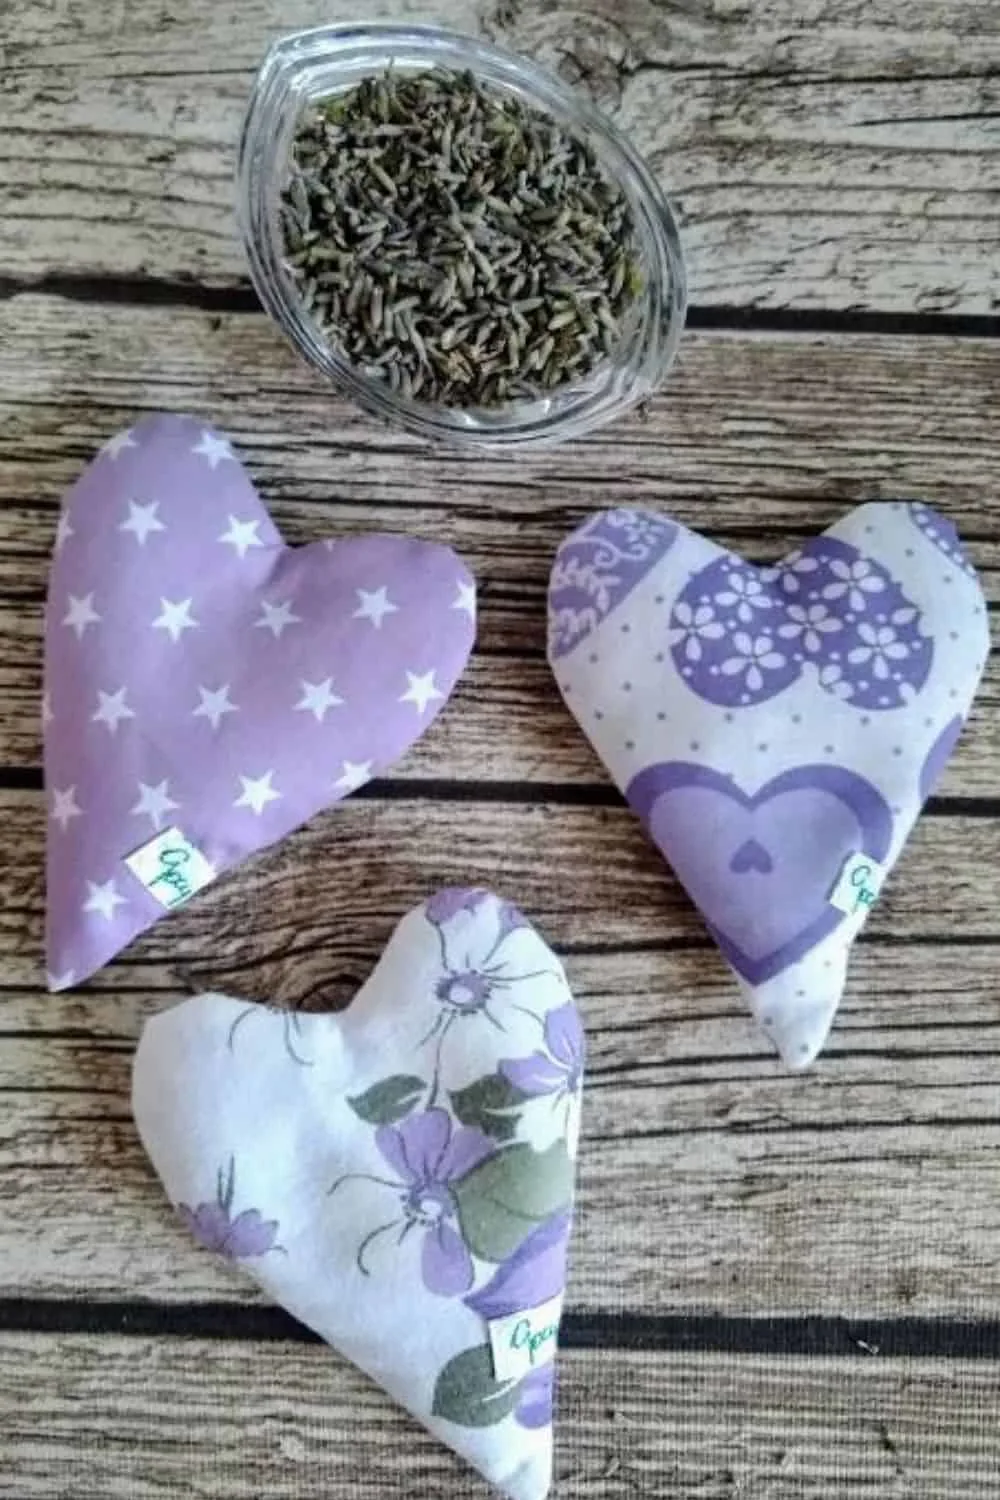 3 heart shaped pouches filled with lavender